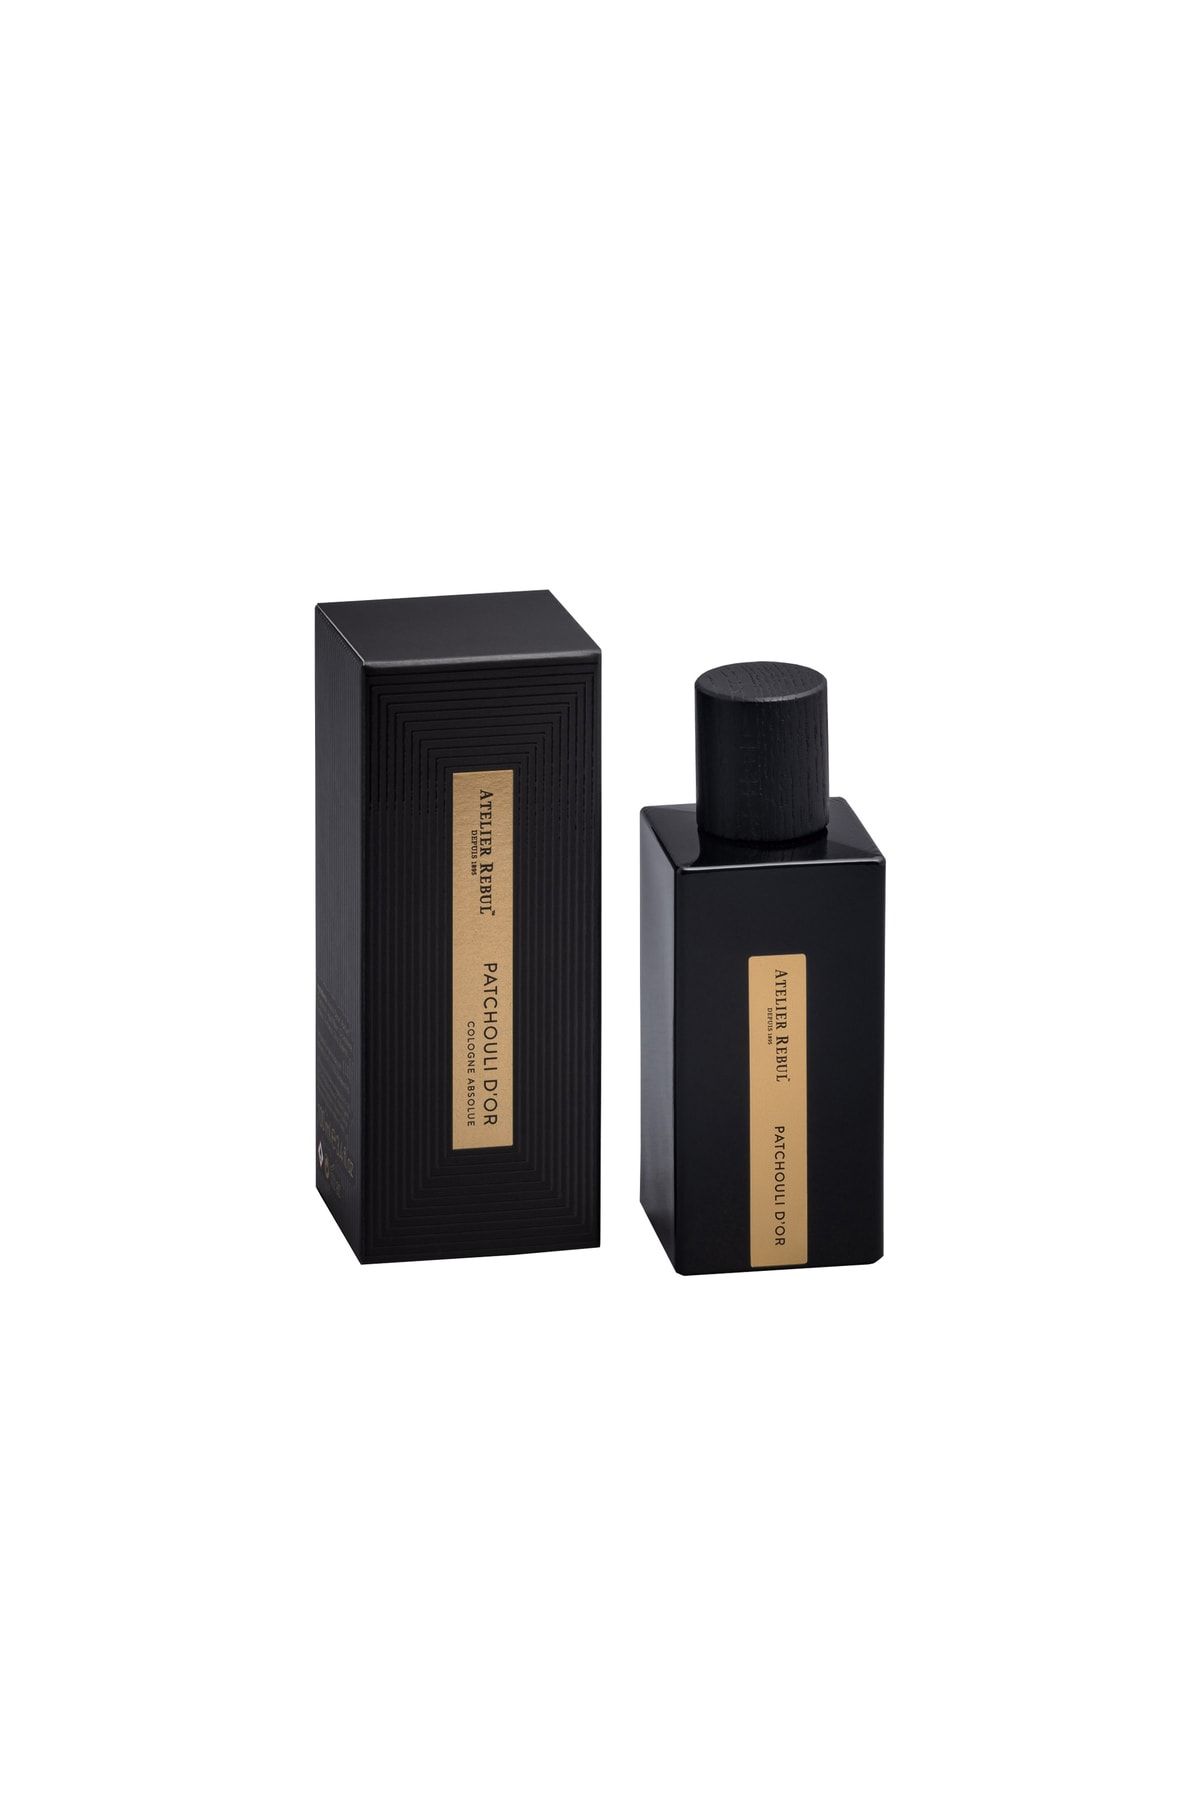 Atelier Rebul Cologne Absolue Patchouli D'Or 100 ml